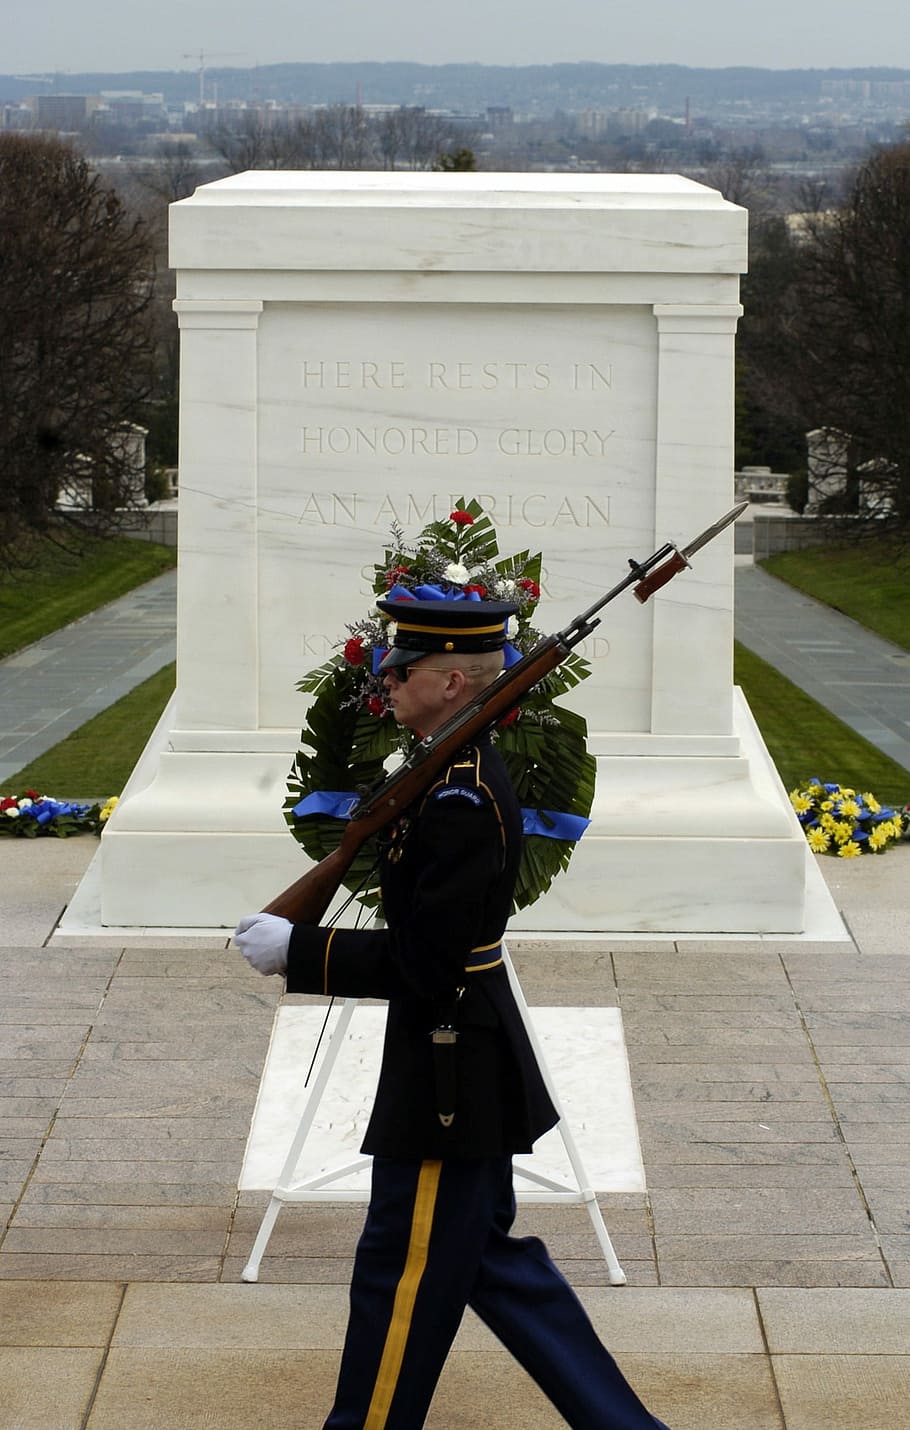 Washington Dc, arlington national cemetery, soldier, honor guard, tomb of the unknown soldier, outside, famous, known, landmark, somber